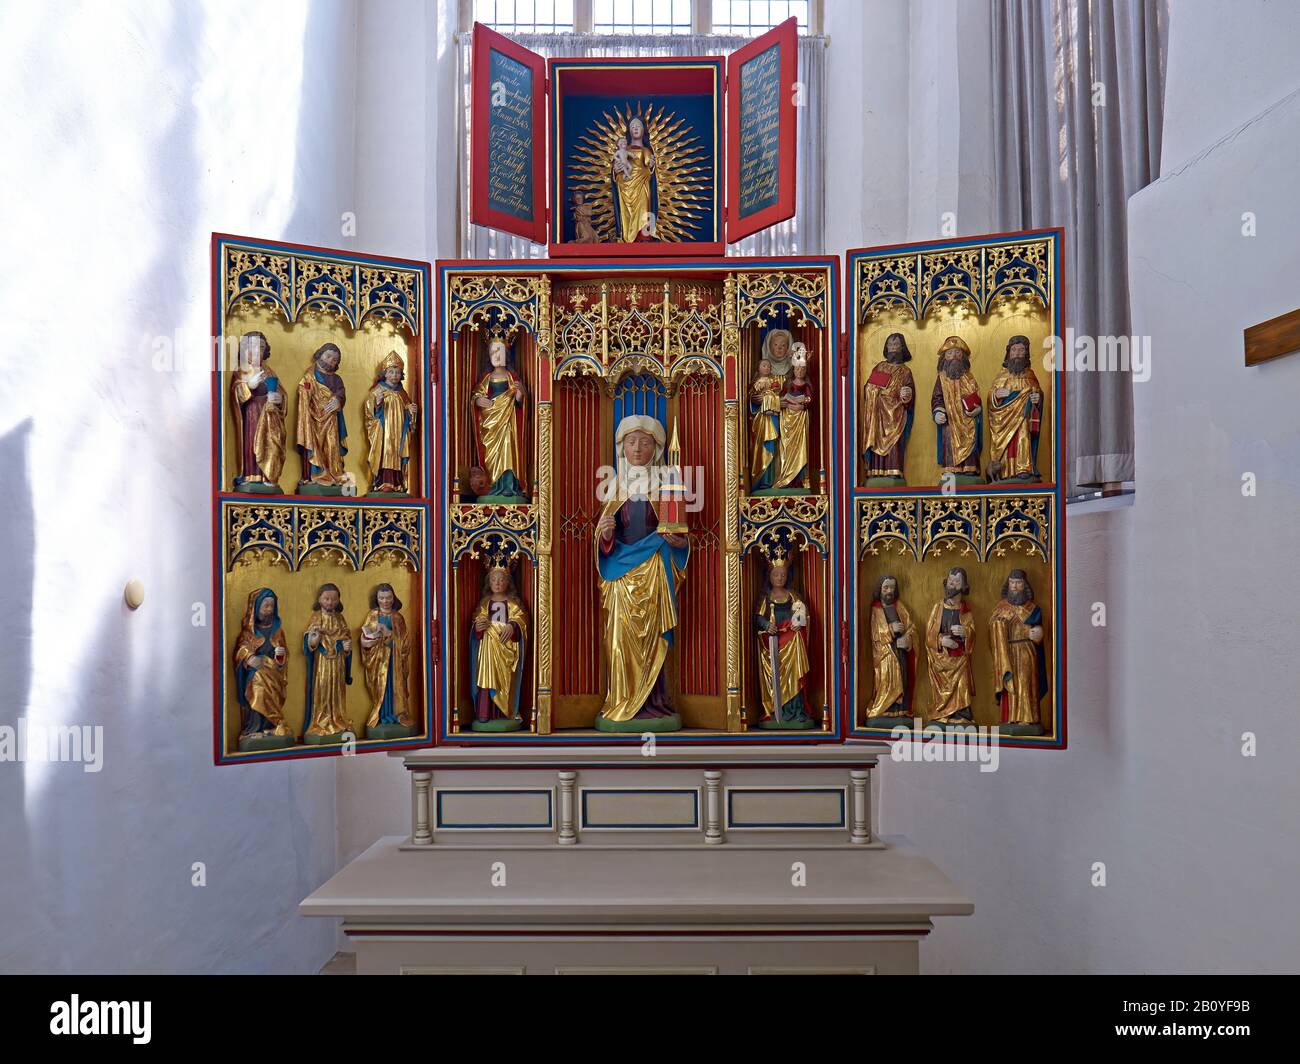 Gertrude altar in the church Ss. Cosmae et Damiani, Hanseatic City of Stade, Lower Saxony, Germany, Stock Photo